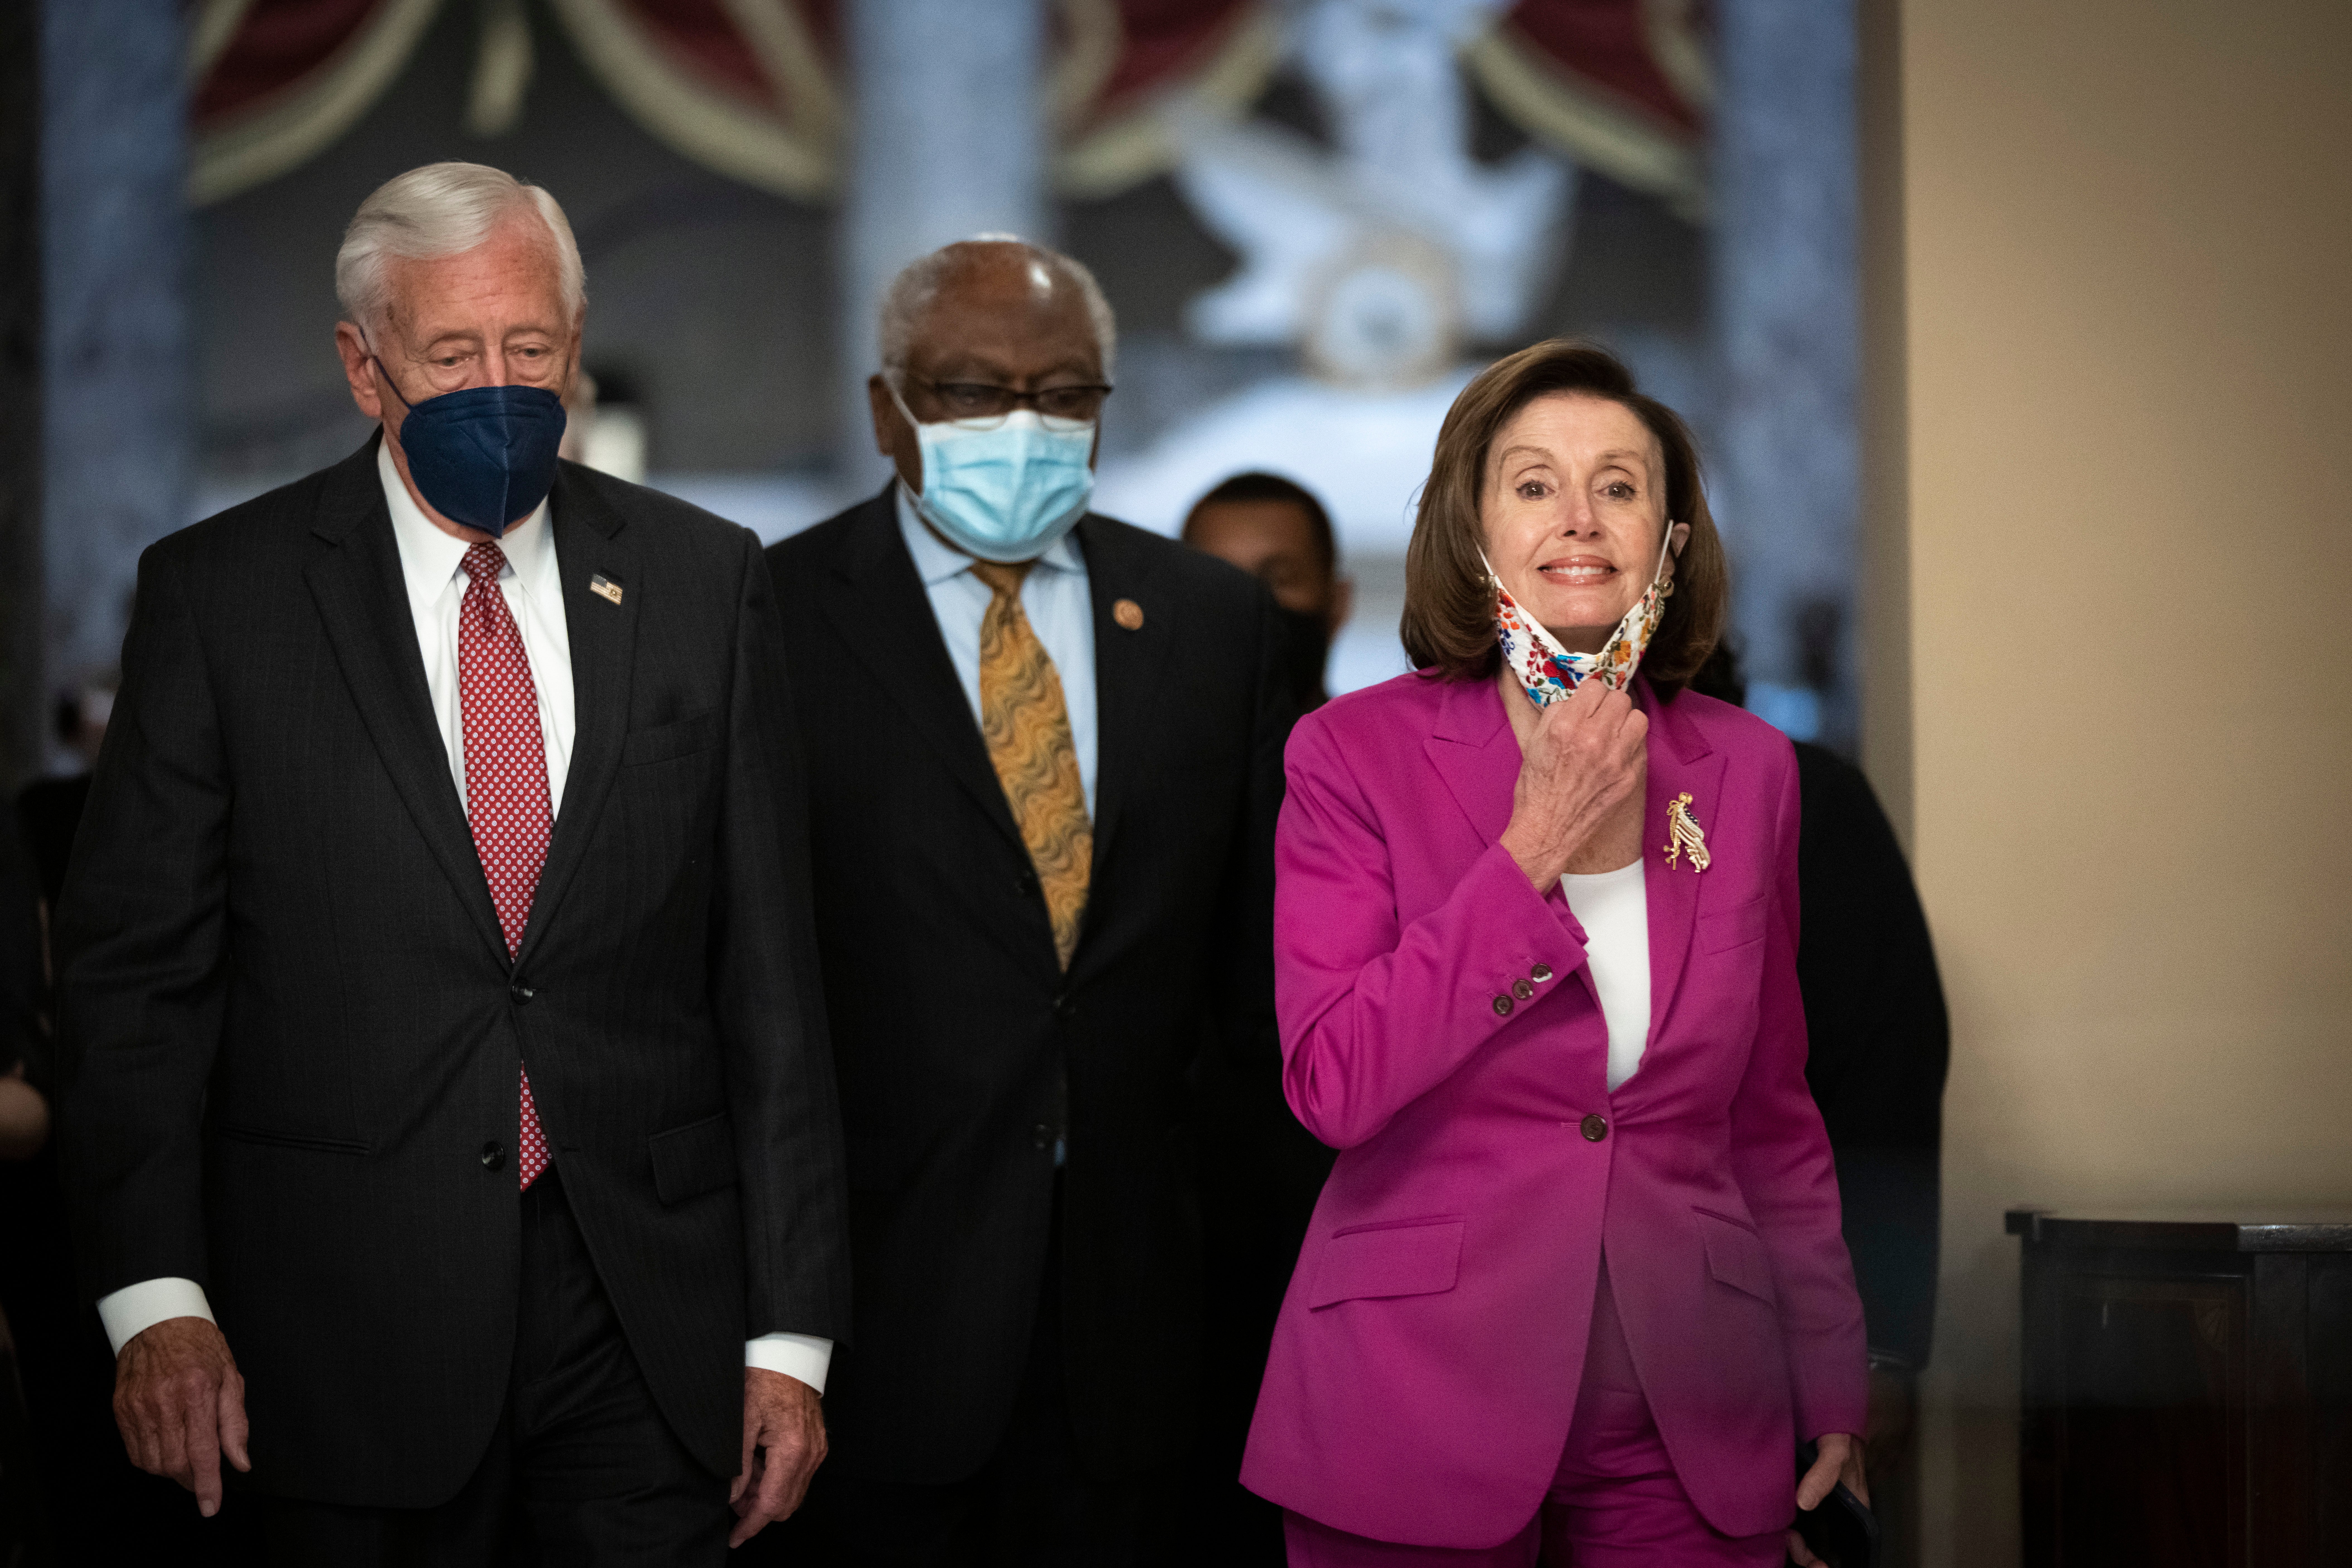 House Majority Leader Rep. Steny Hoyer (D-MD), House Majority Whip Rep. James Clyburn (D-SC) and Speaker of the House Nancy Pelosi (D-CA) walk to the House Chamber at the U.S. Capitol November 05, 2021 in Washington, DC